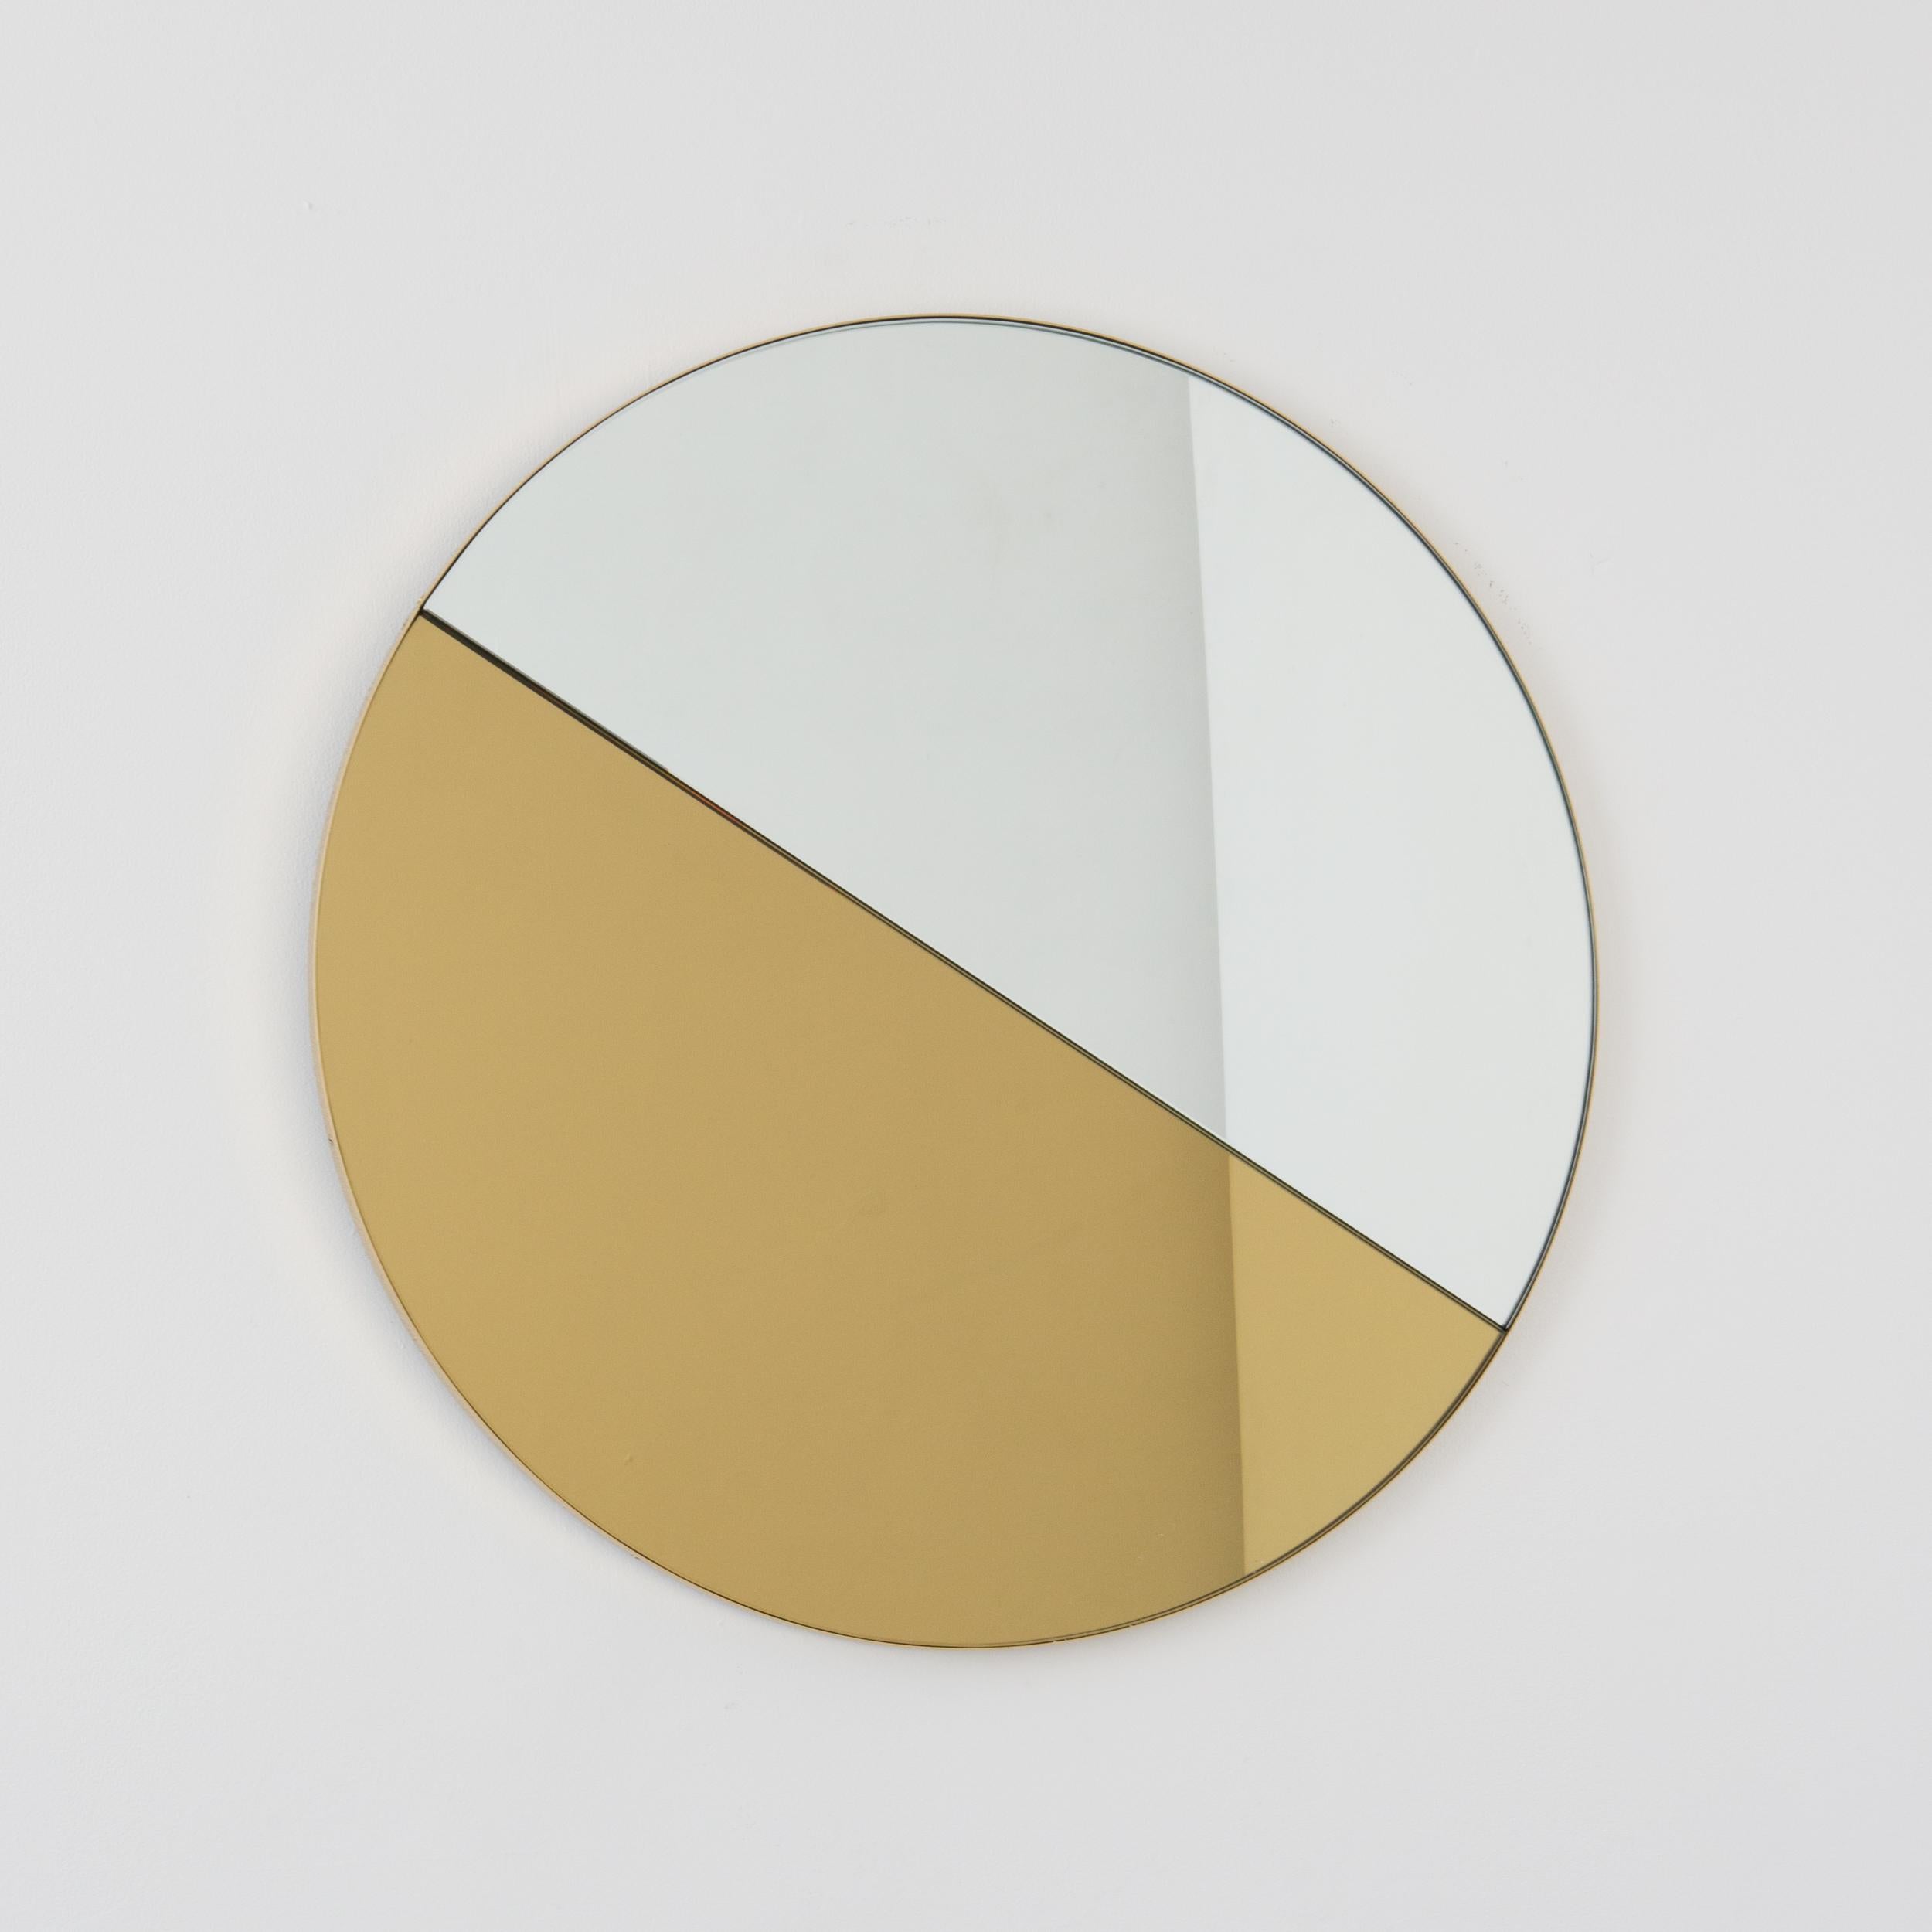 Brushed In Stock Orbis Dualis Round Gold Silver Tinted Mirror, Brass Frame, Medium For Sale